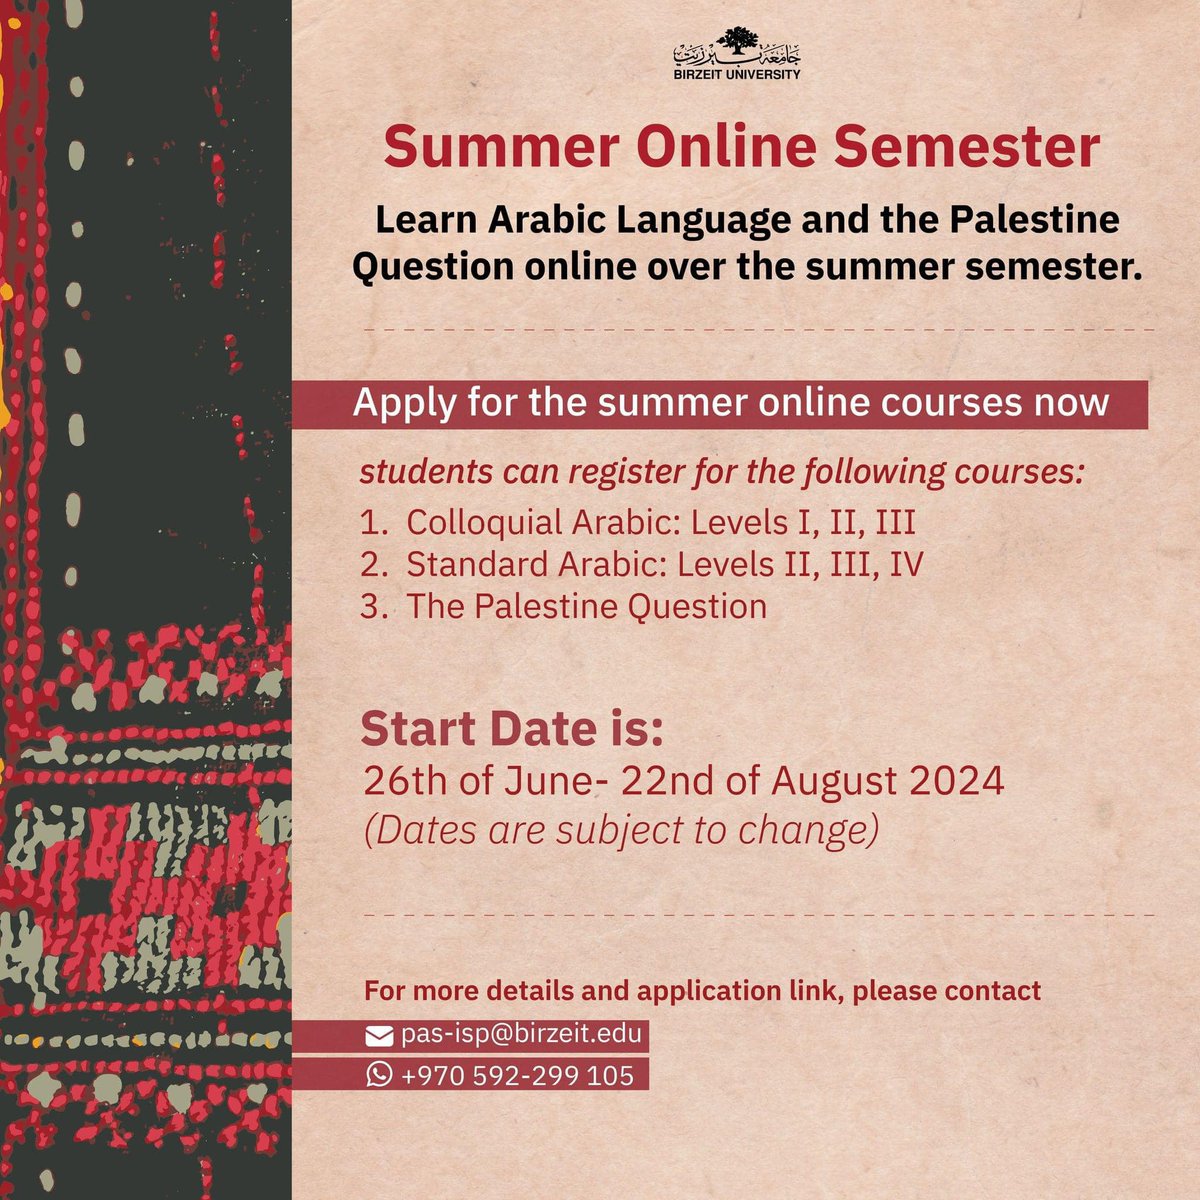 Do you want to learn #Arabic from the comfort of your home? If so, apply now for the online summer semester. #learnarabic #BZU Contact info: WhatsApp:+970-592-299105 Email: pas-isp@birzeit.edu Website: birzeit.edu